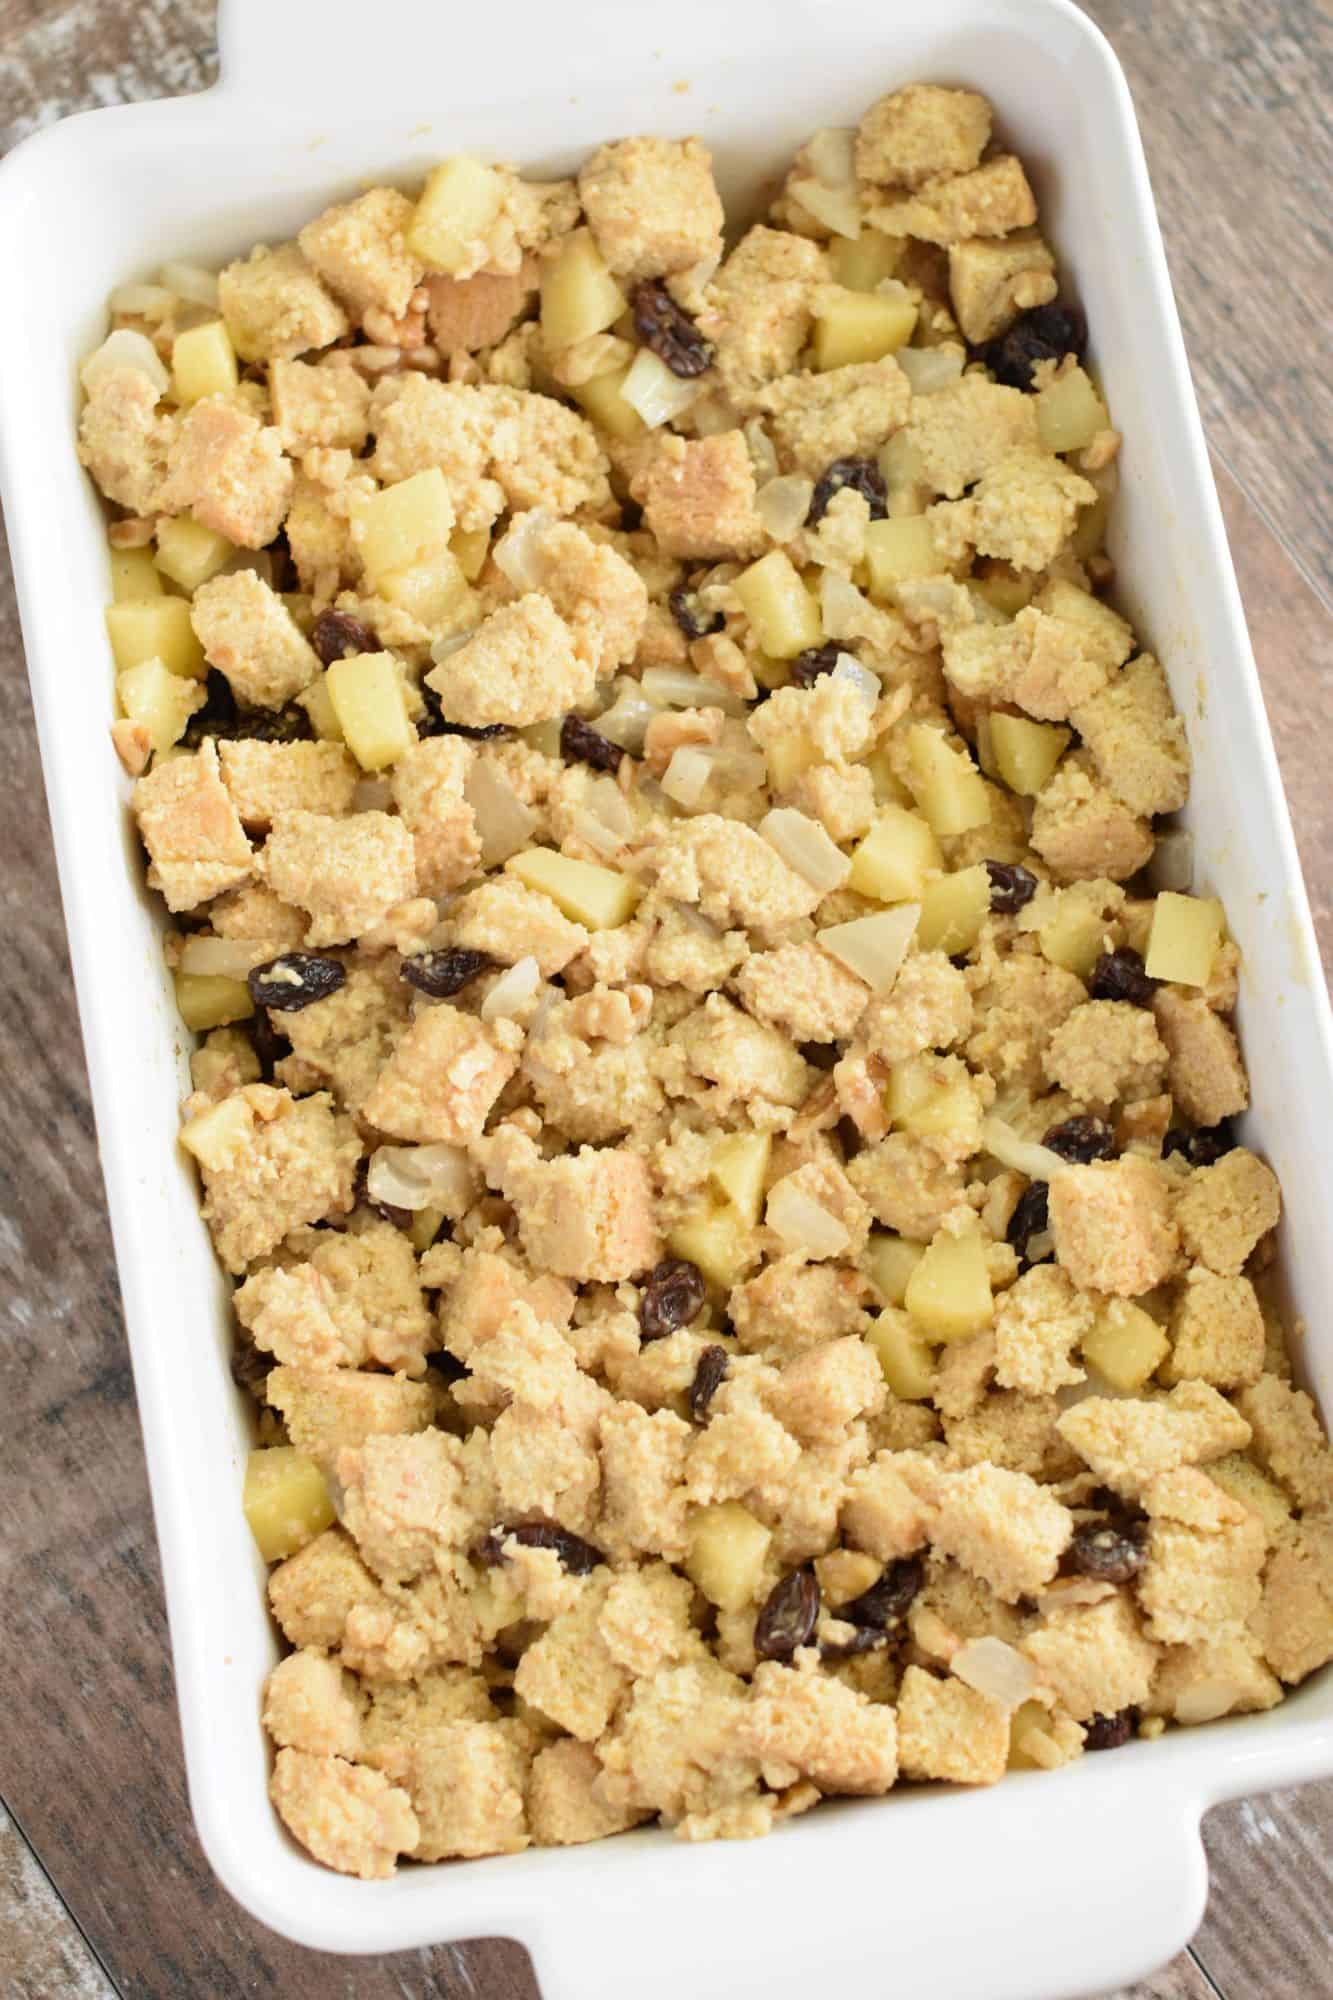 stuffing ingredients combined in casserole dish